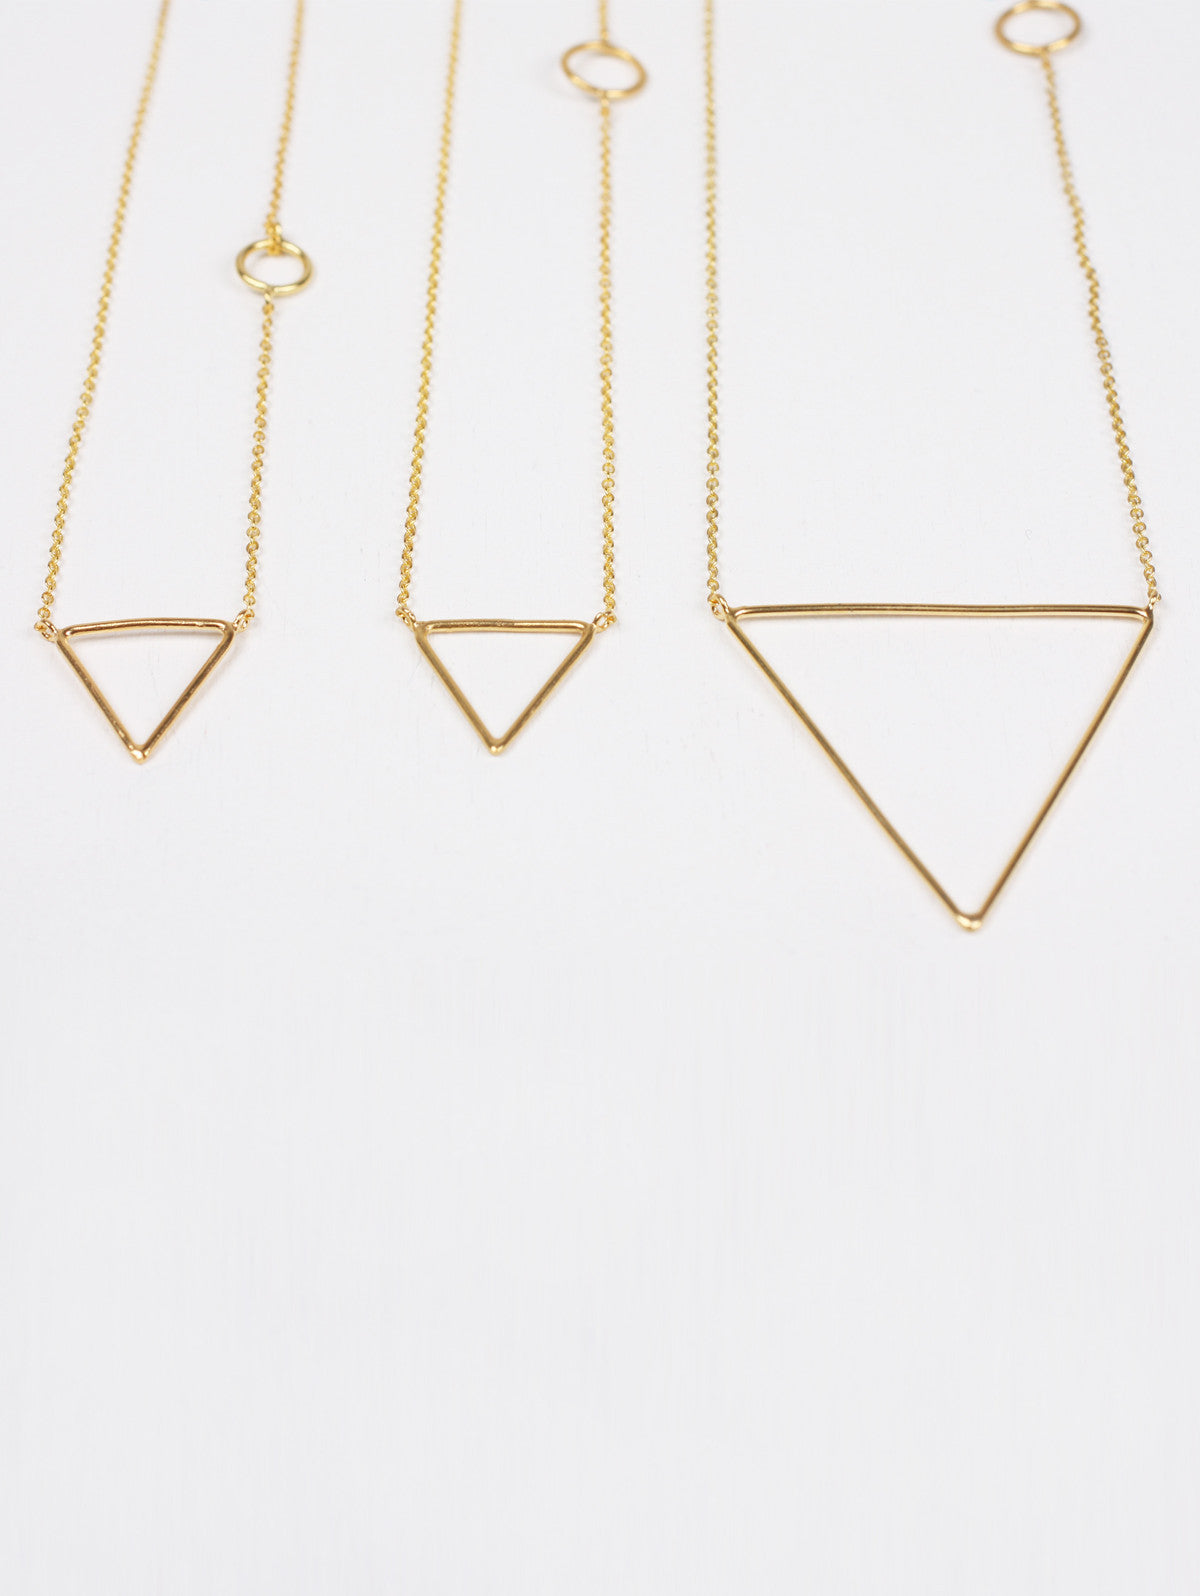 Gold Pyramid Necklaces